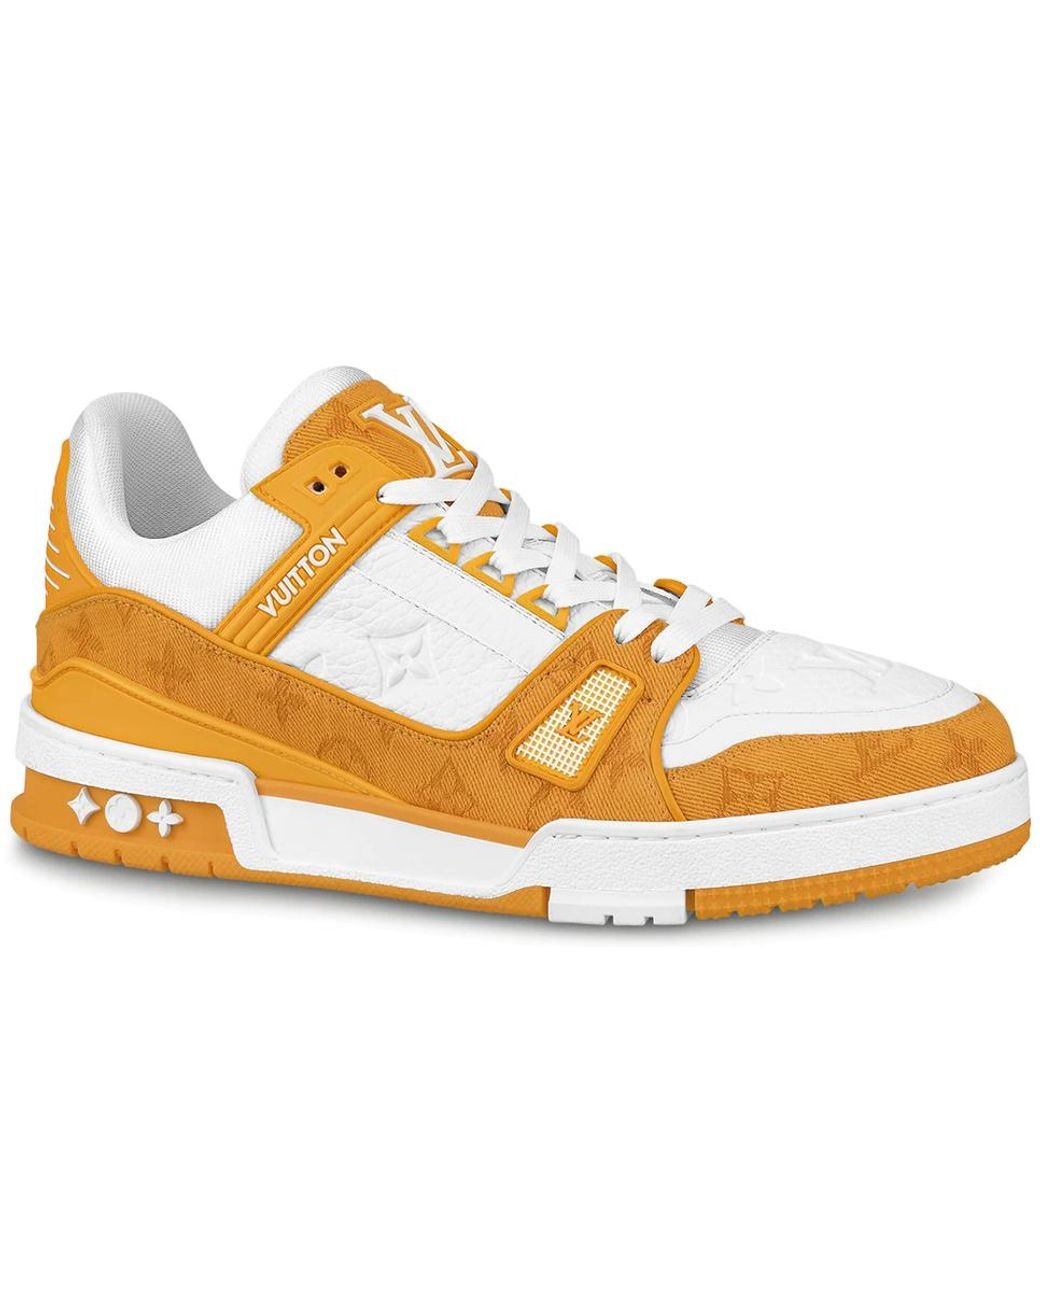 vuitton sneakers yellow brown